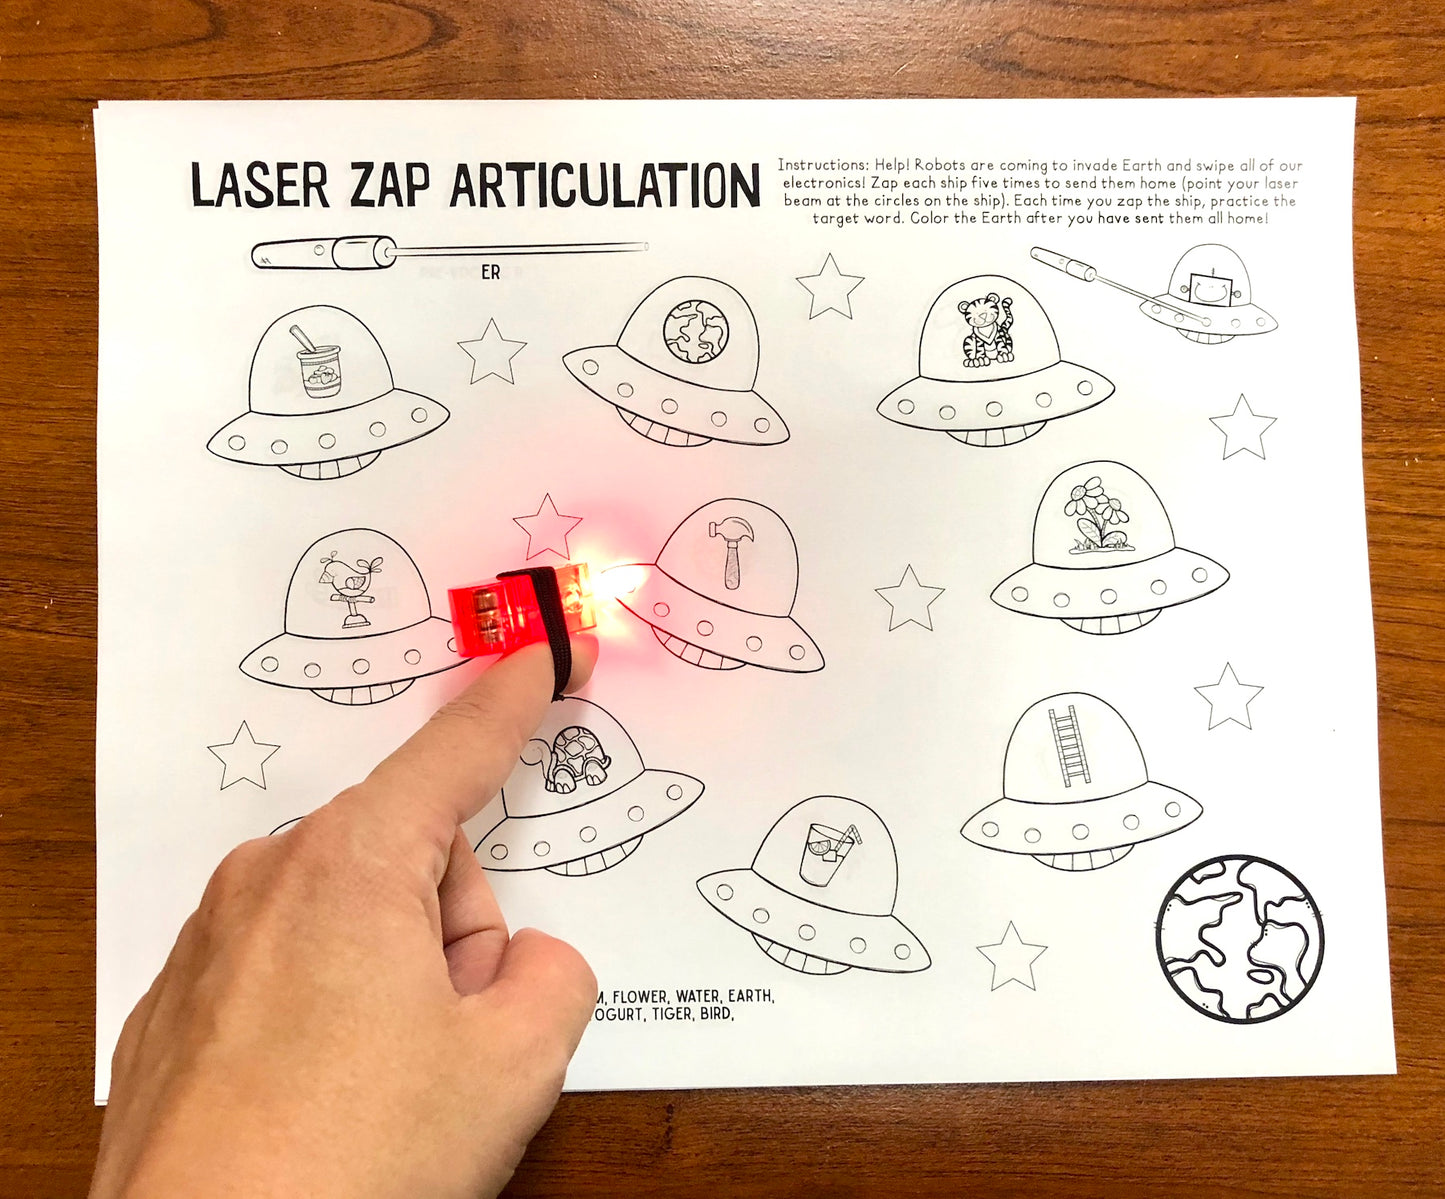 Laser Zap Speech ~ Print & Go for Artic and Language (laser pointers!)